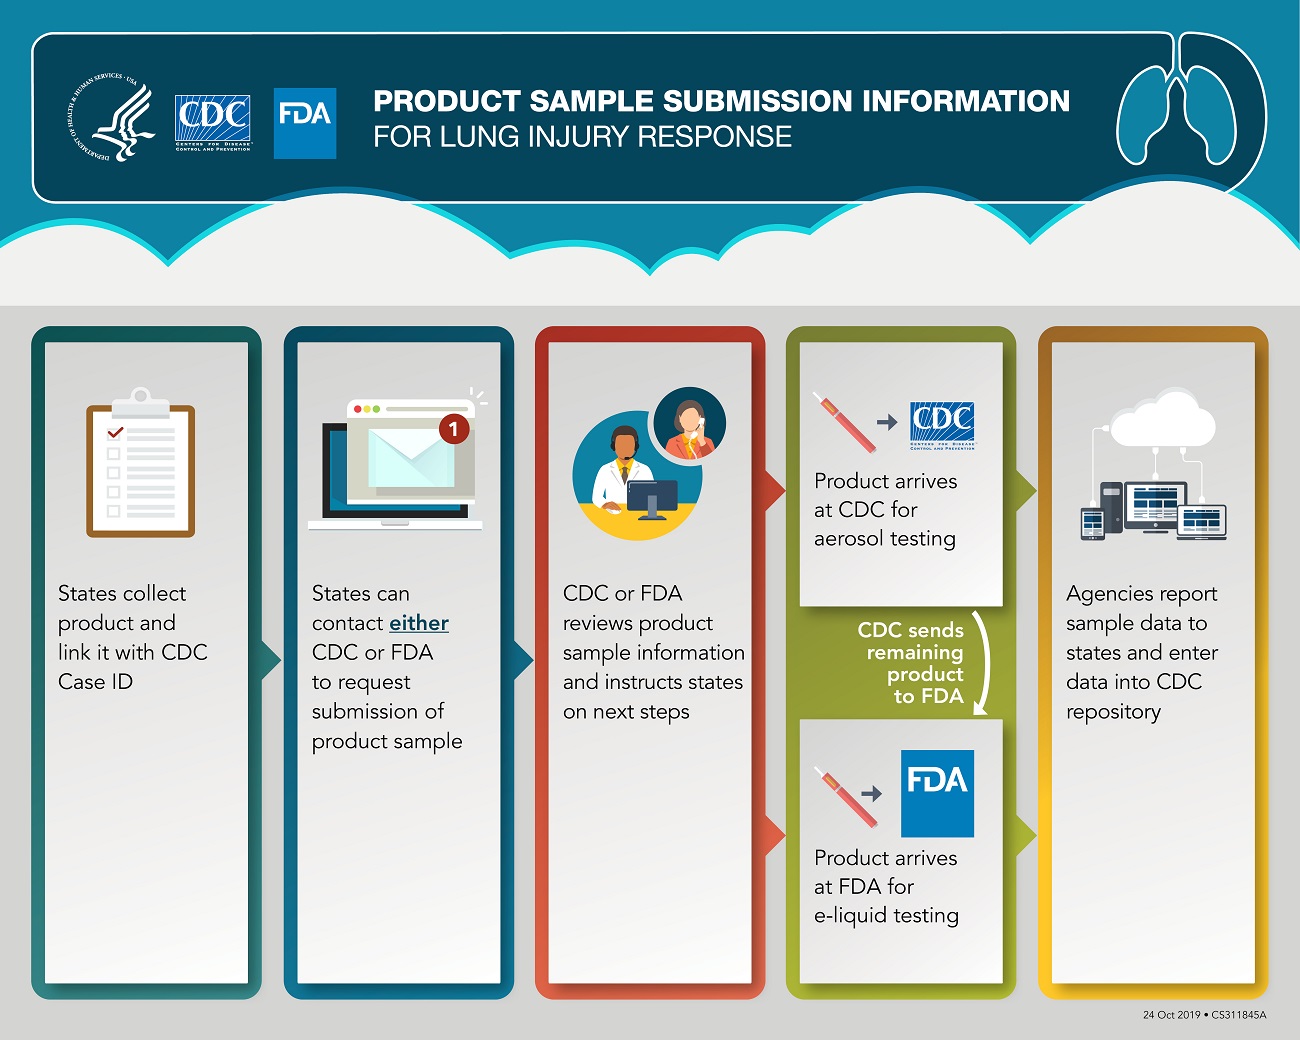 This graphic outlines how states can submit product samples for testing at CDC and FDA for the lung injury response. In the first box to the left, a clipboard with a checkmark is shown to help illustrate the first step in the process. In this step, states collect product and link it with a CDC case ID. An arrow then leads users to the next box to the right to show the next step in the process, which is illustrated by an image of a computer receiving an email. In this step, states can request to submit product to either CDC or FDA. Product(s) must be linked to a confirmed or probable case and have a CDC case ID. An arrow then leads users to the next box to the right showing the third step, illustrated by a two people on a phone call speaking with each other. In this step, points of contact will review sample submissions using agreed upon criteria (e.g., volume of sample). These points of contact will then work with the state on next steps. From here, the graphic points to two different boxes, depending on how the sample is triaged. The top box shows the situation in which the product sample contains sufficient volume and CDC will conduct aerosol testing on it. This box is illustrated with an e-cigarette, or vaping product, with an arrow to CDC. CDC will then send remaining sample to FDA for e-liquid testing. The bottom box in this step shows e-liquid testing at FDA. It is illustrated with an e-cigarette, or vaping, product with an arrow to FDA. The last step is shown in the box to the right. It is illustrated by computers linking with the cloud. In this step, agencies report data to the states. Additionally, both CDC and FDA will enter data from their testing in a secure repository to link epidemiologic, clinical, and product sample information to cases.